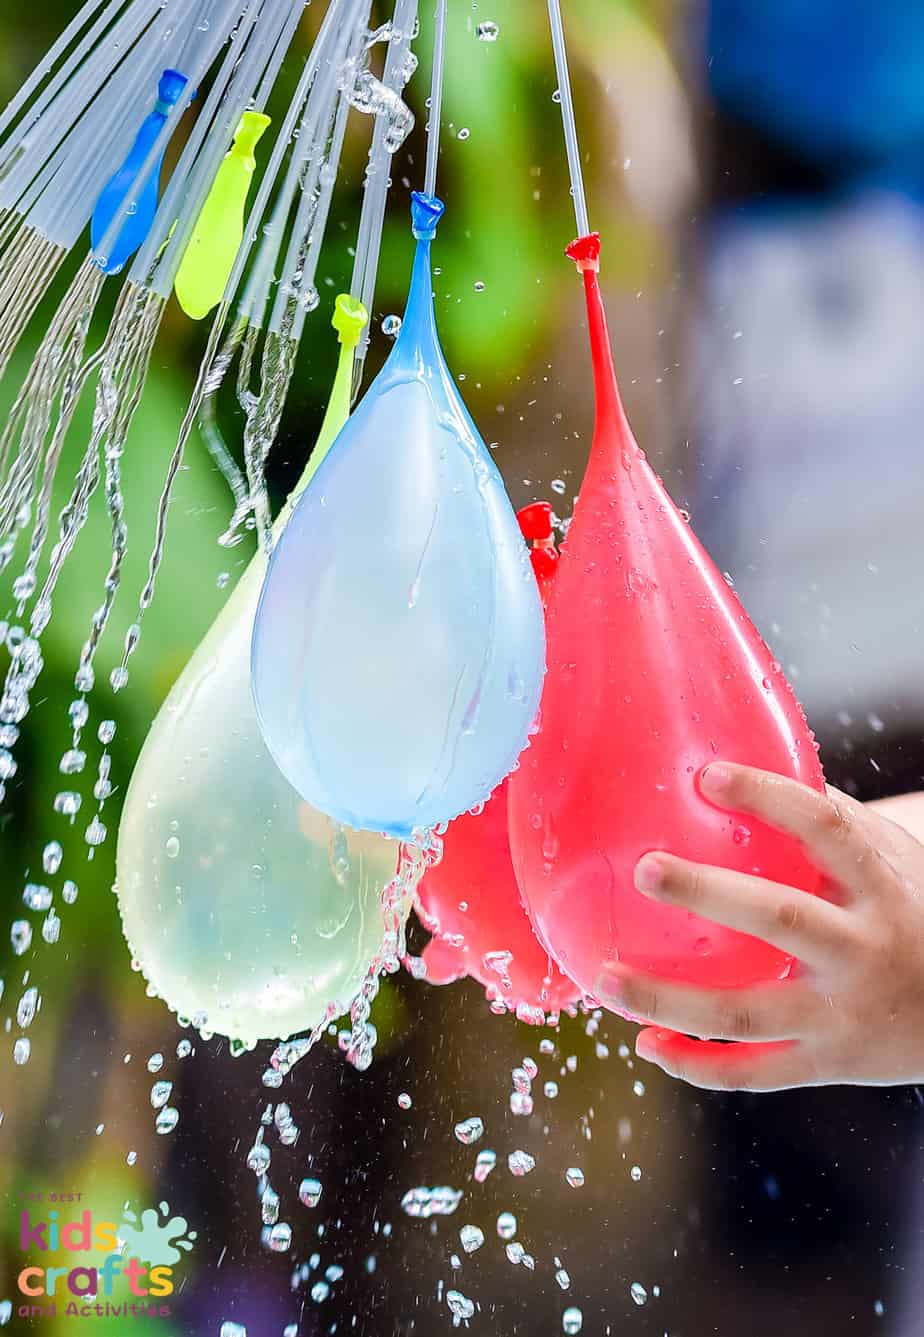 water balloon games for kids